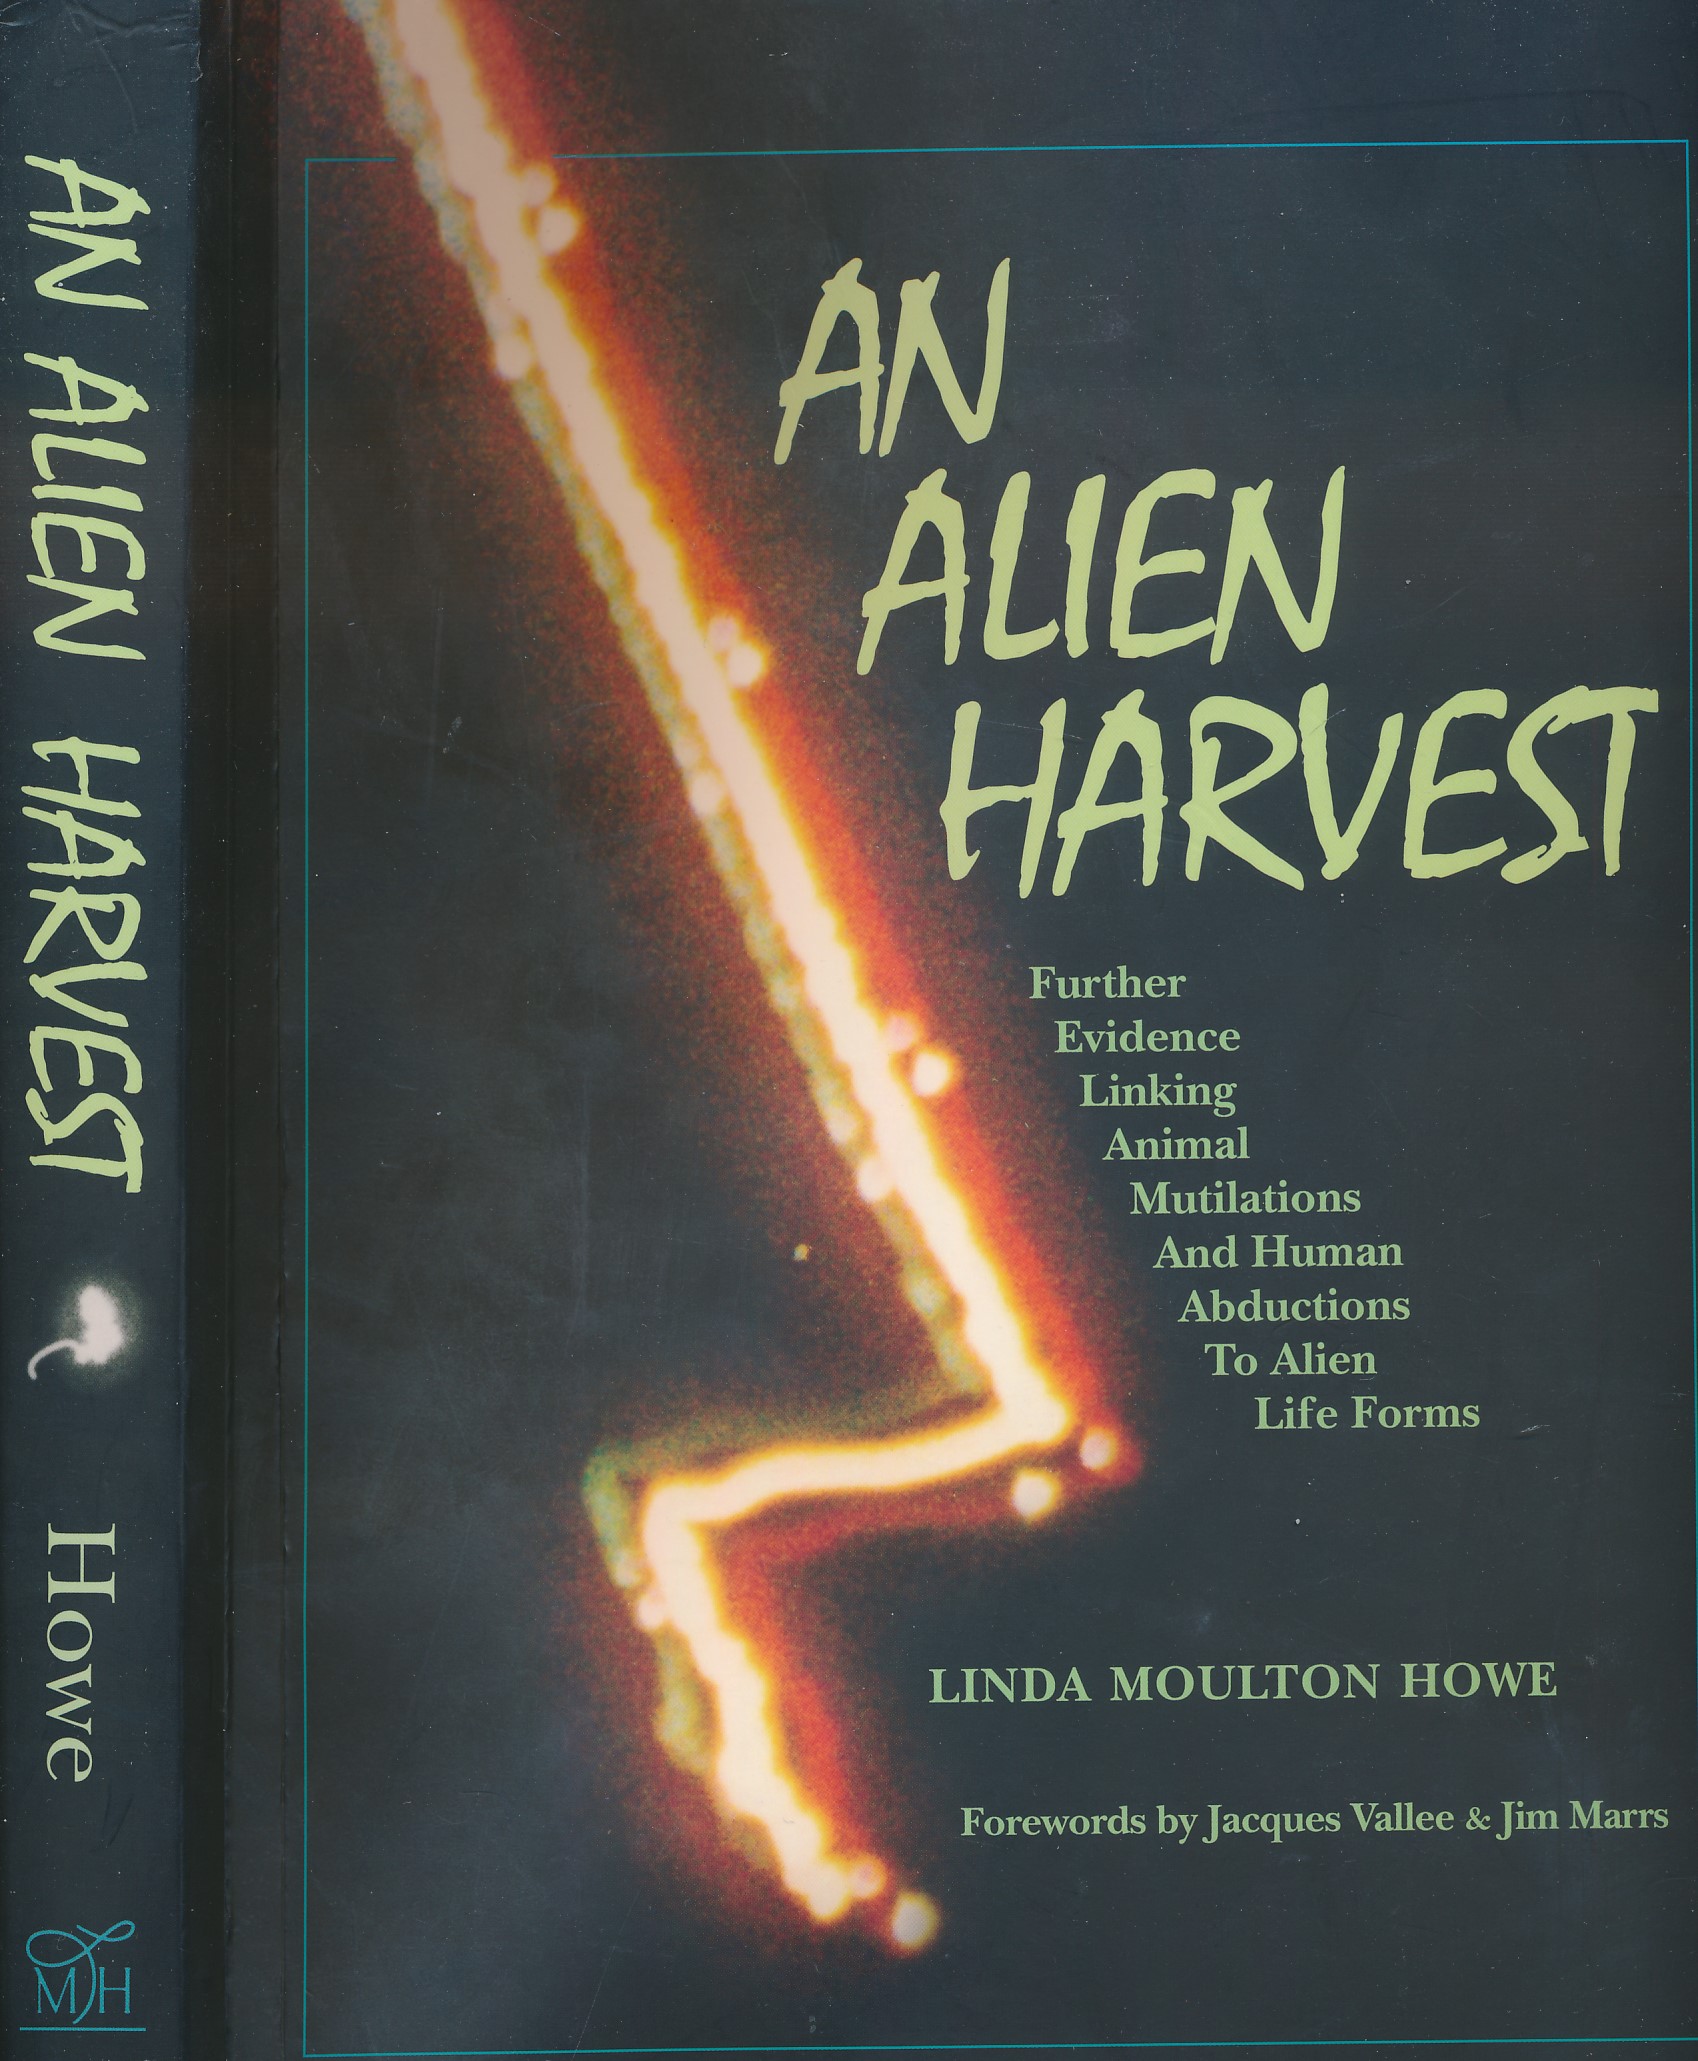 An Alien Harvest. Further Evidence Linking Animal Mutilations and Human Abductions to Alien Life Forms